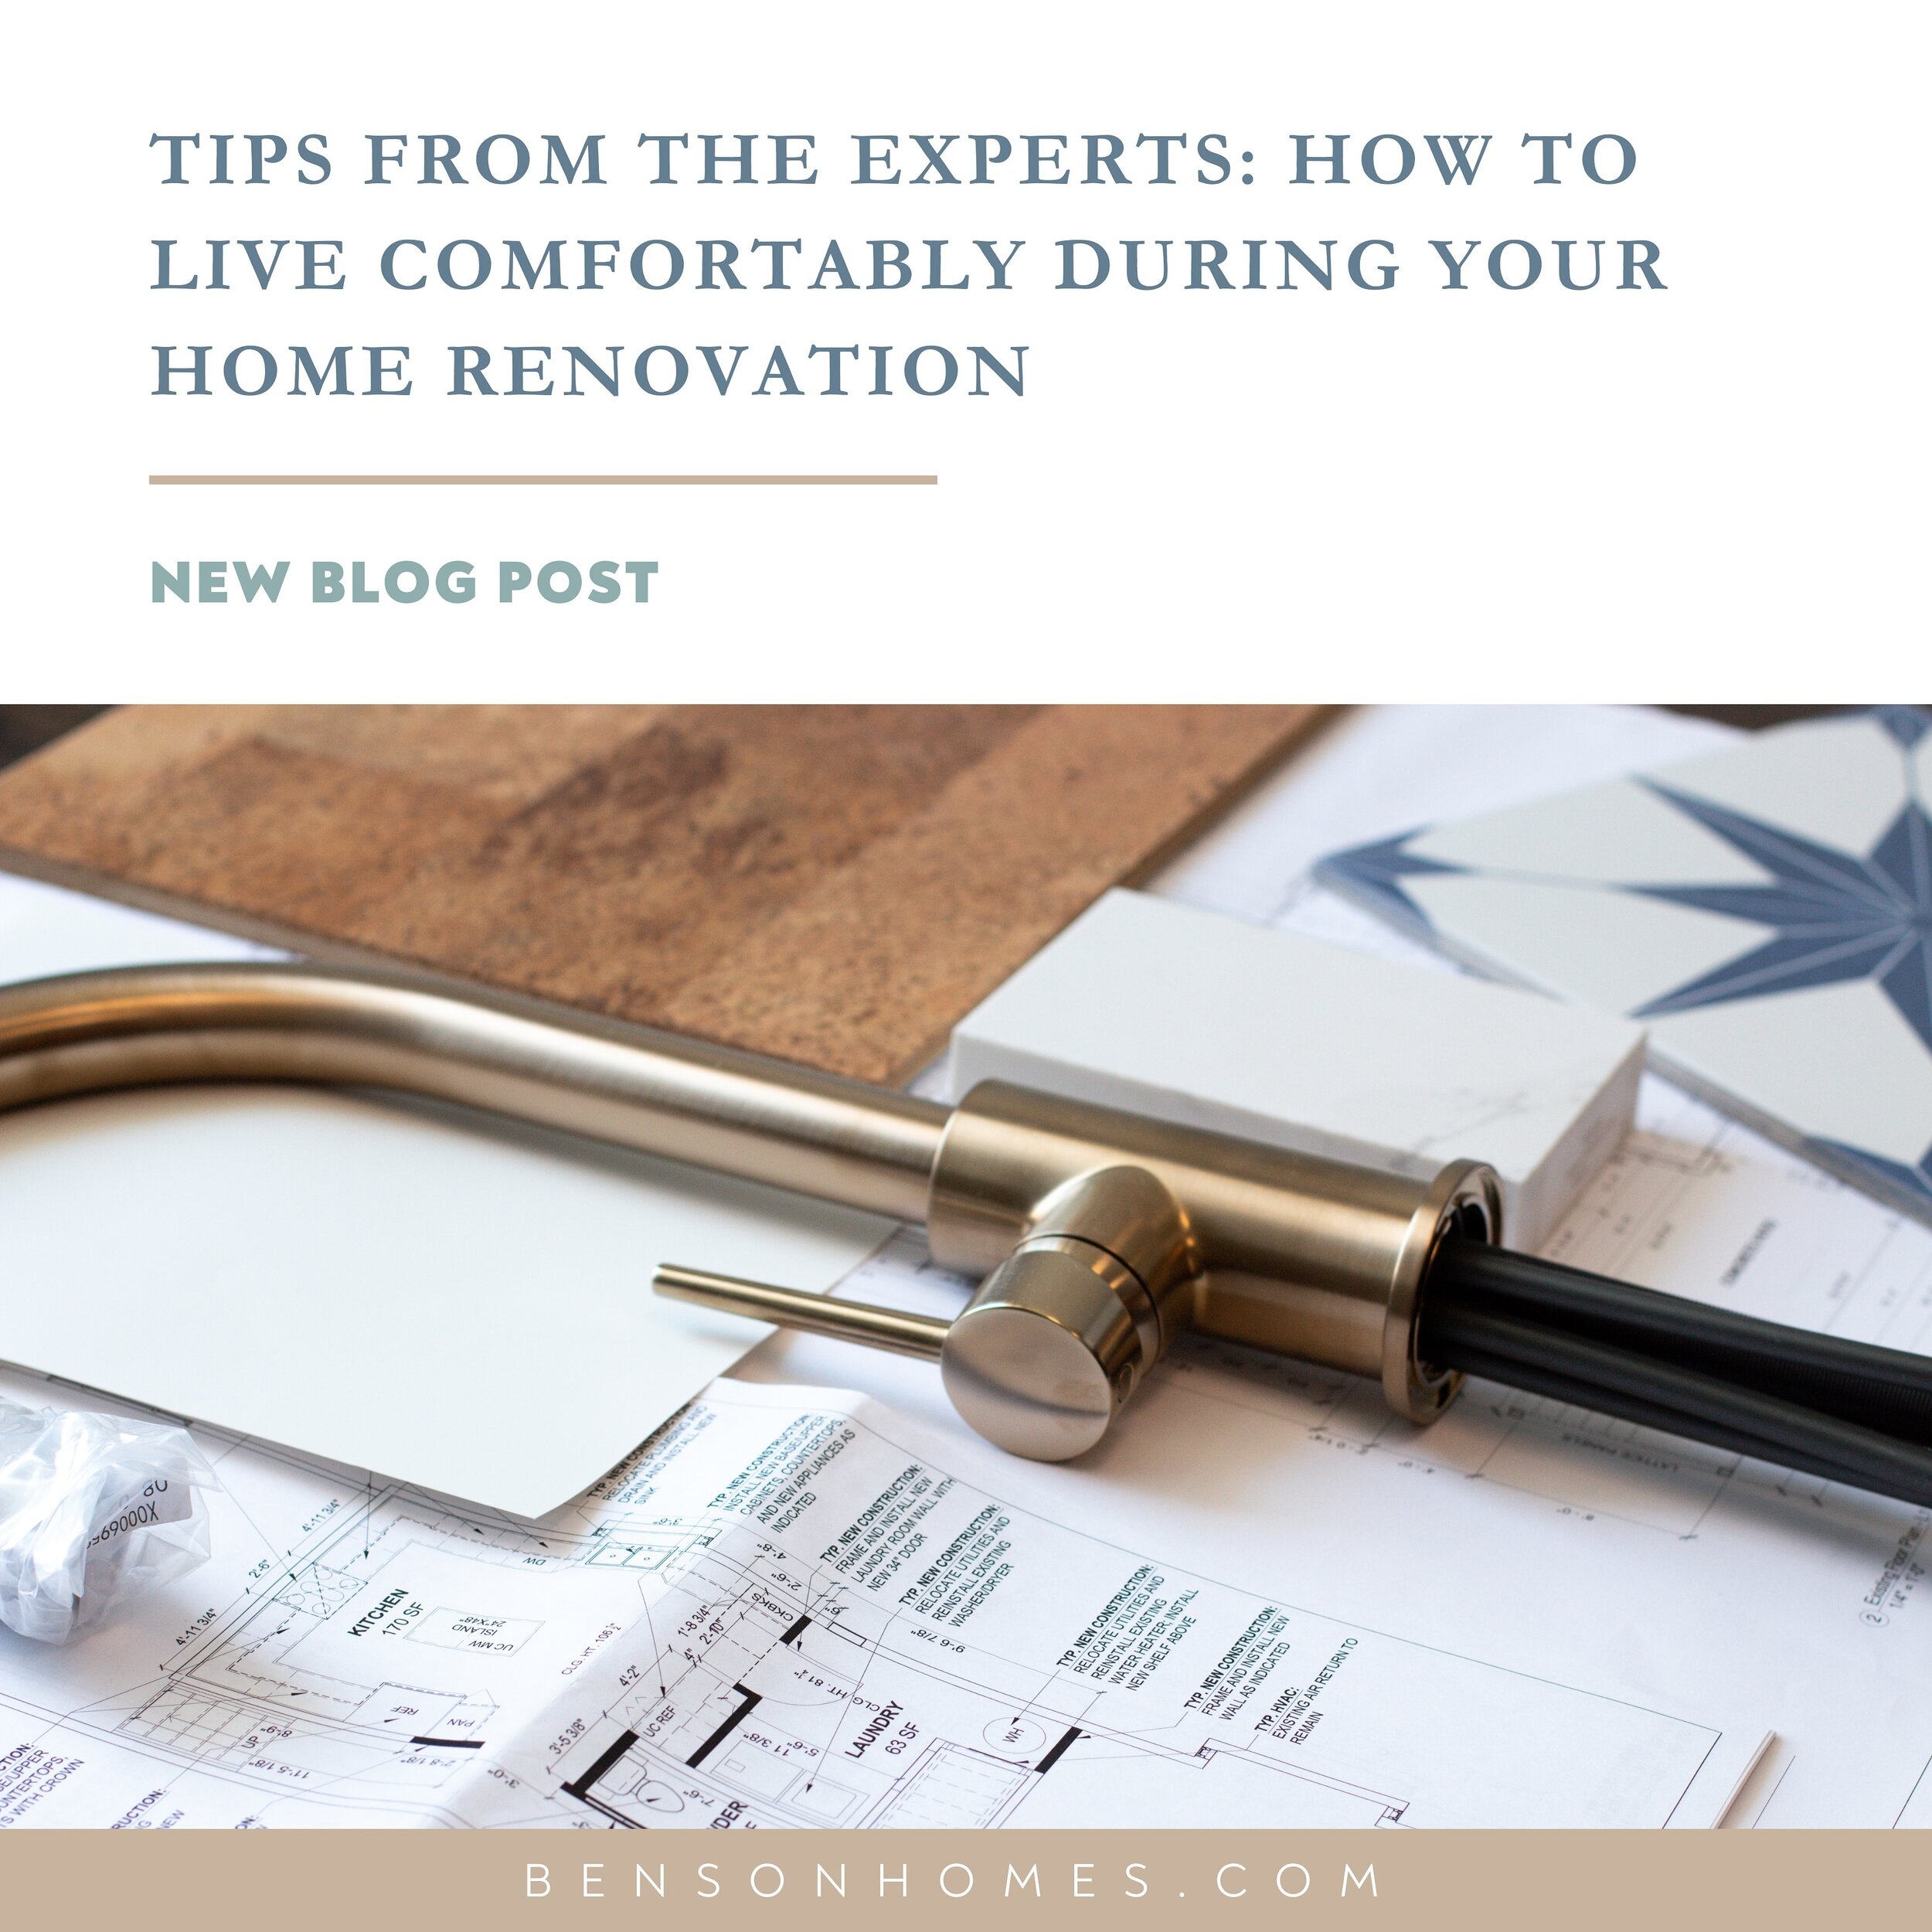 Have you finally decided to embark on the home renovation you&rsquo;ve been dreaming up for so long? Moving forward with renovation plans can be such an exciting time, but can also bring some stress along with it as you face the inevitable &ldquo;con